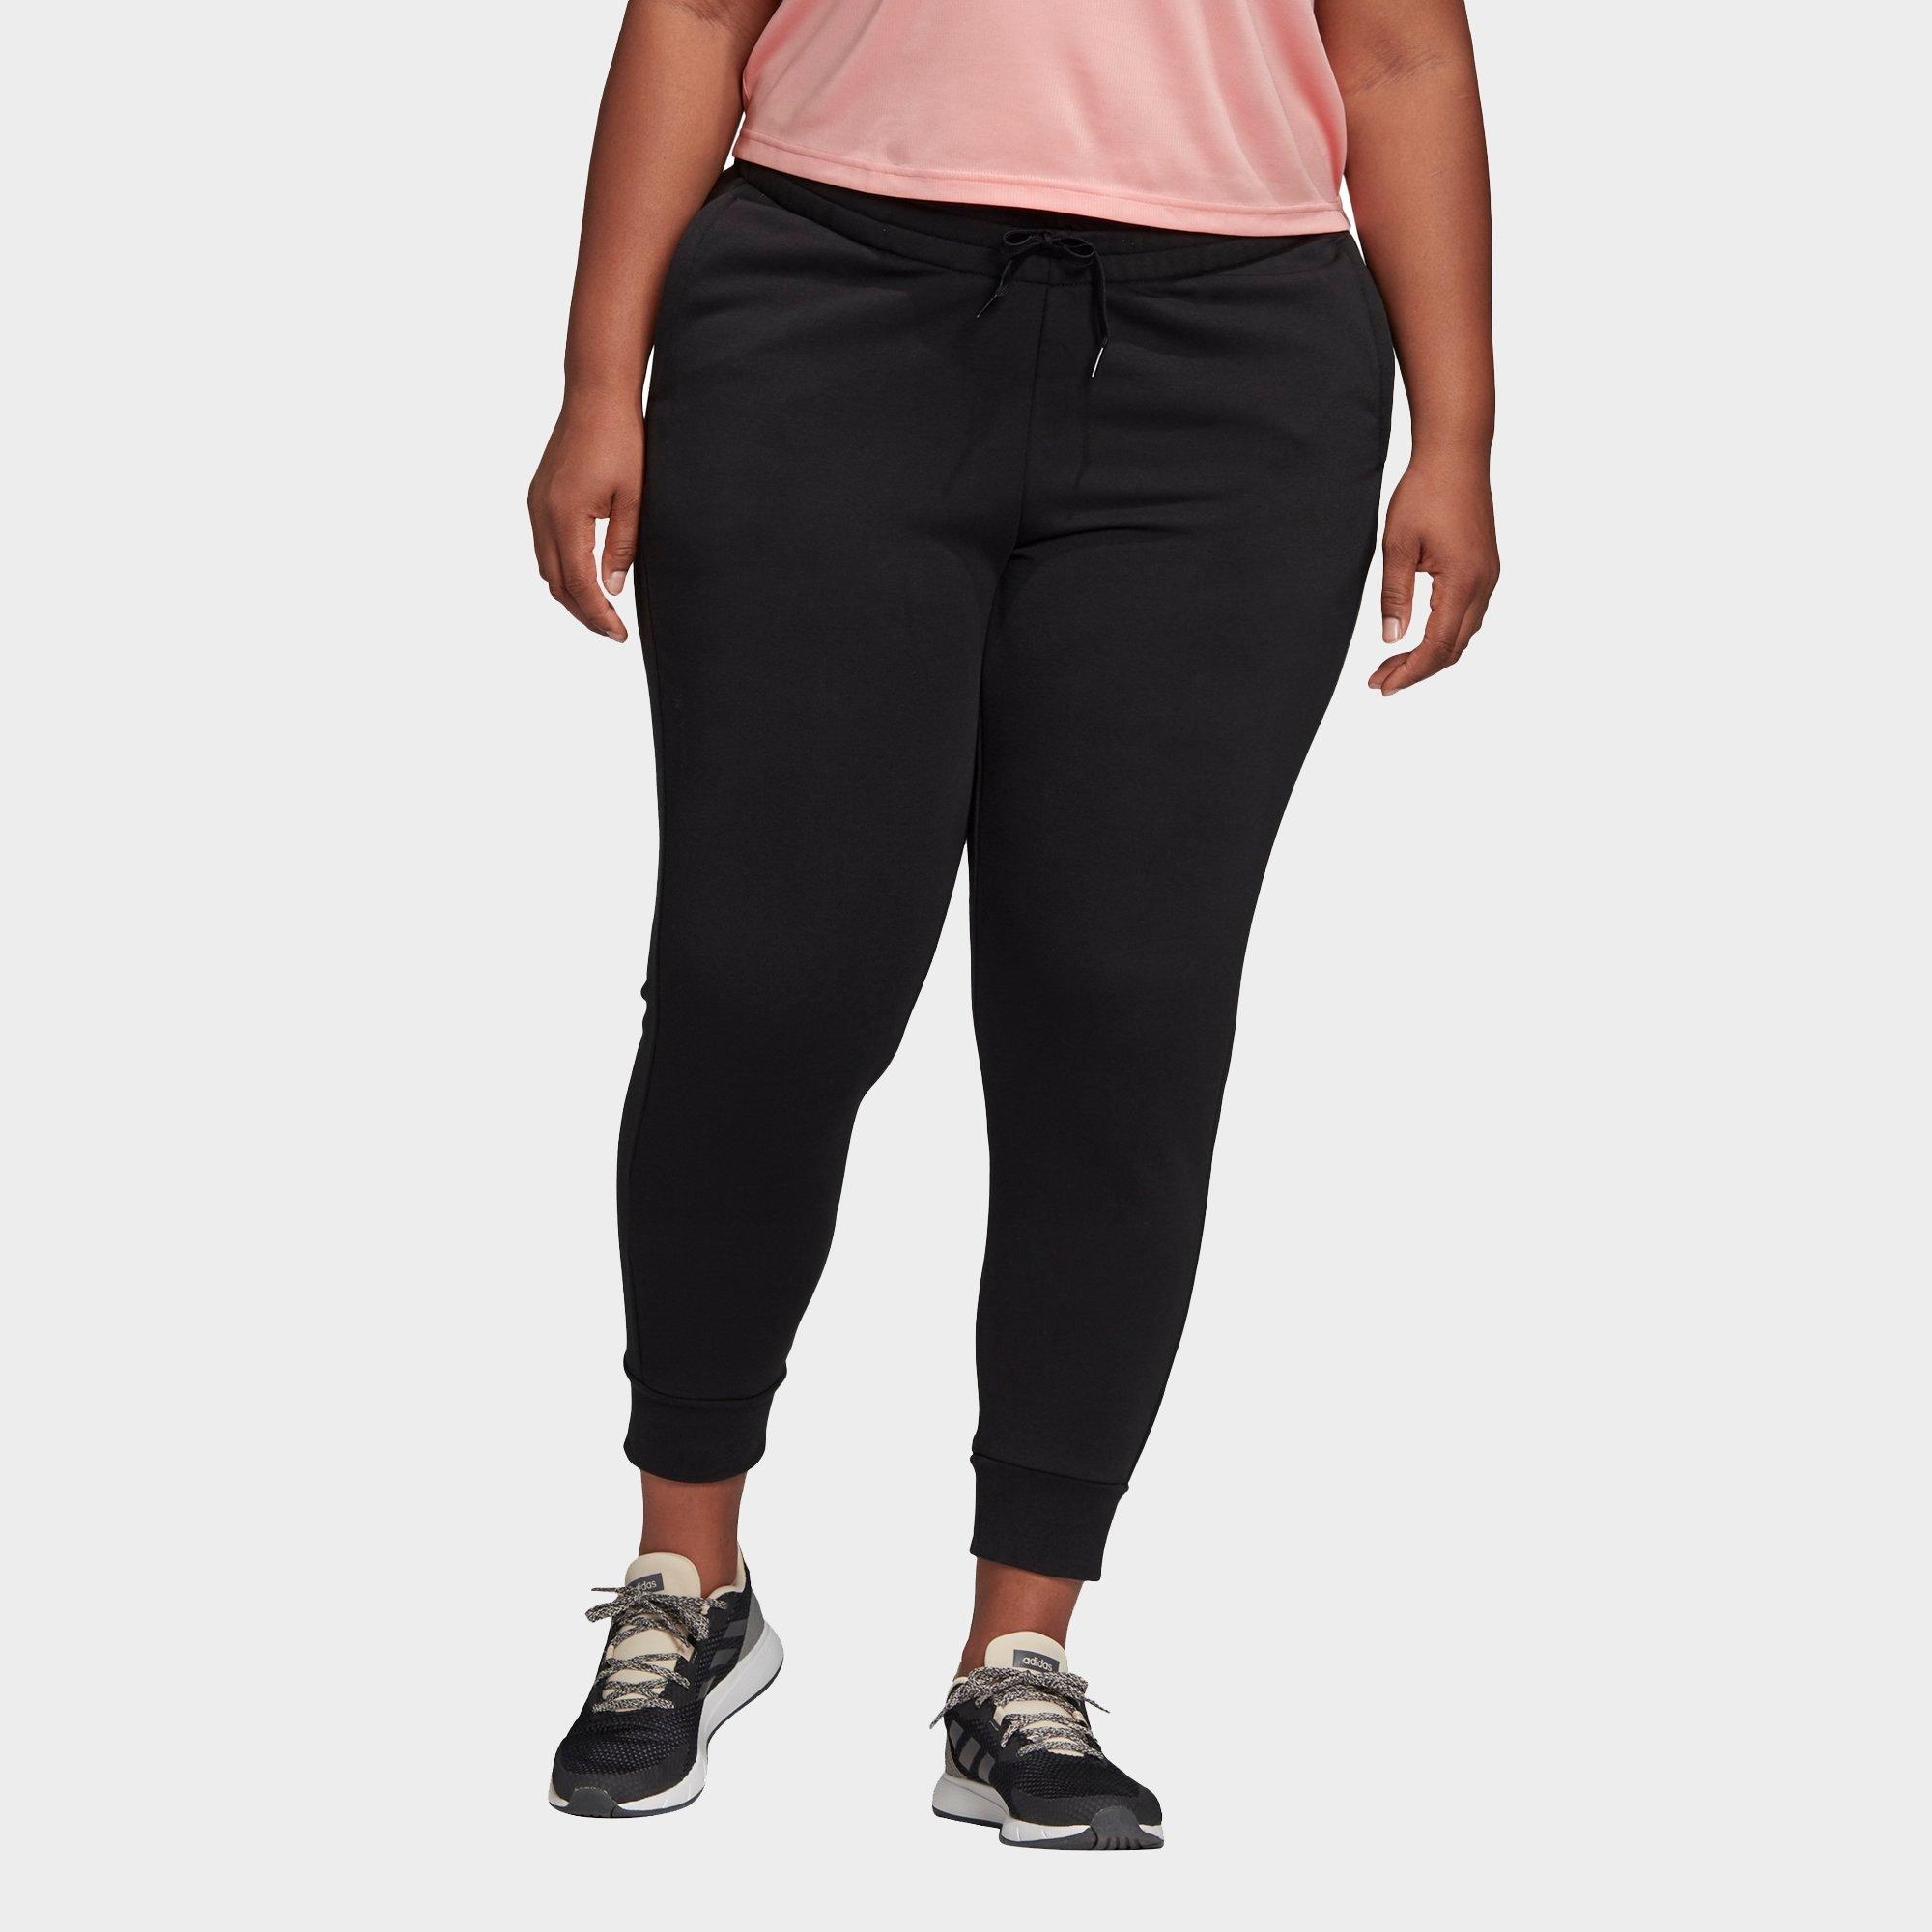 UPC 193105001659 product image for Adidas Women's Essentials Jogger Pants (Plus Size) in Black Size 2X-Large Cotton | upcitemdb.com